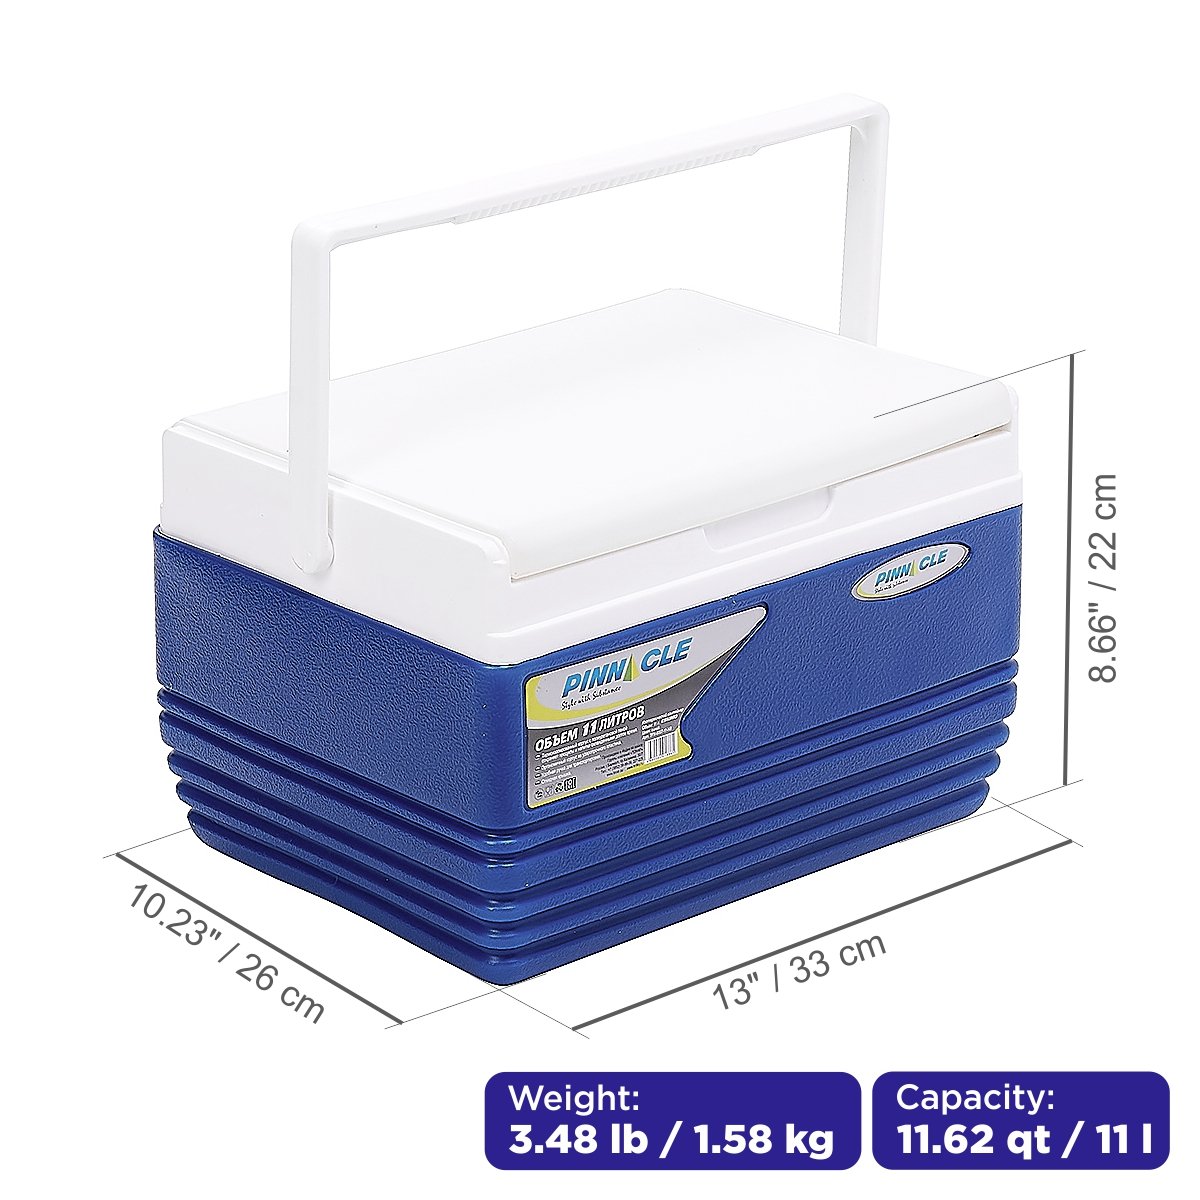 Eskimo Portable Hard-Sided Ice Chest for Camping, 11 qt, Navy Blue is 13 inches long, 10.2 inches wide and 8.7 inches high, weighing 3.5 lbs